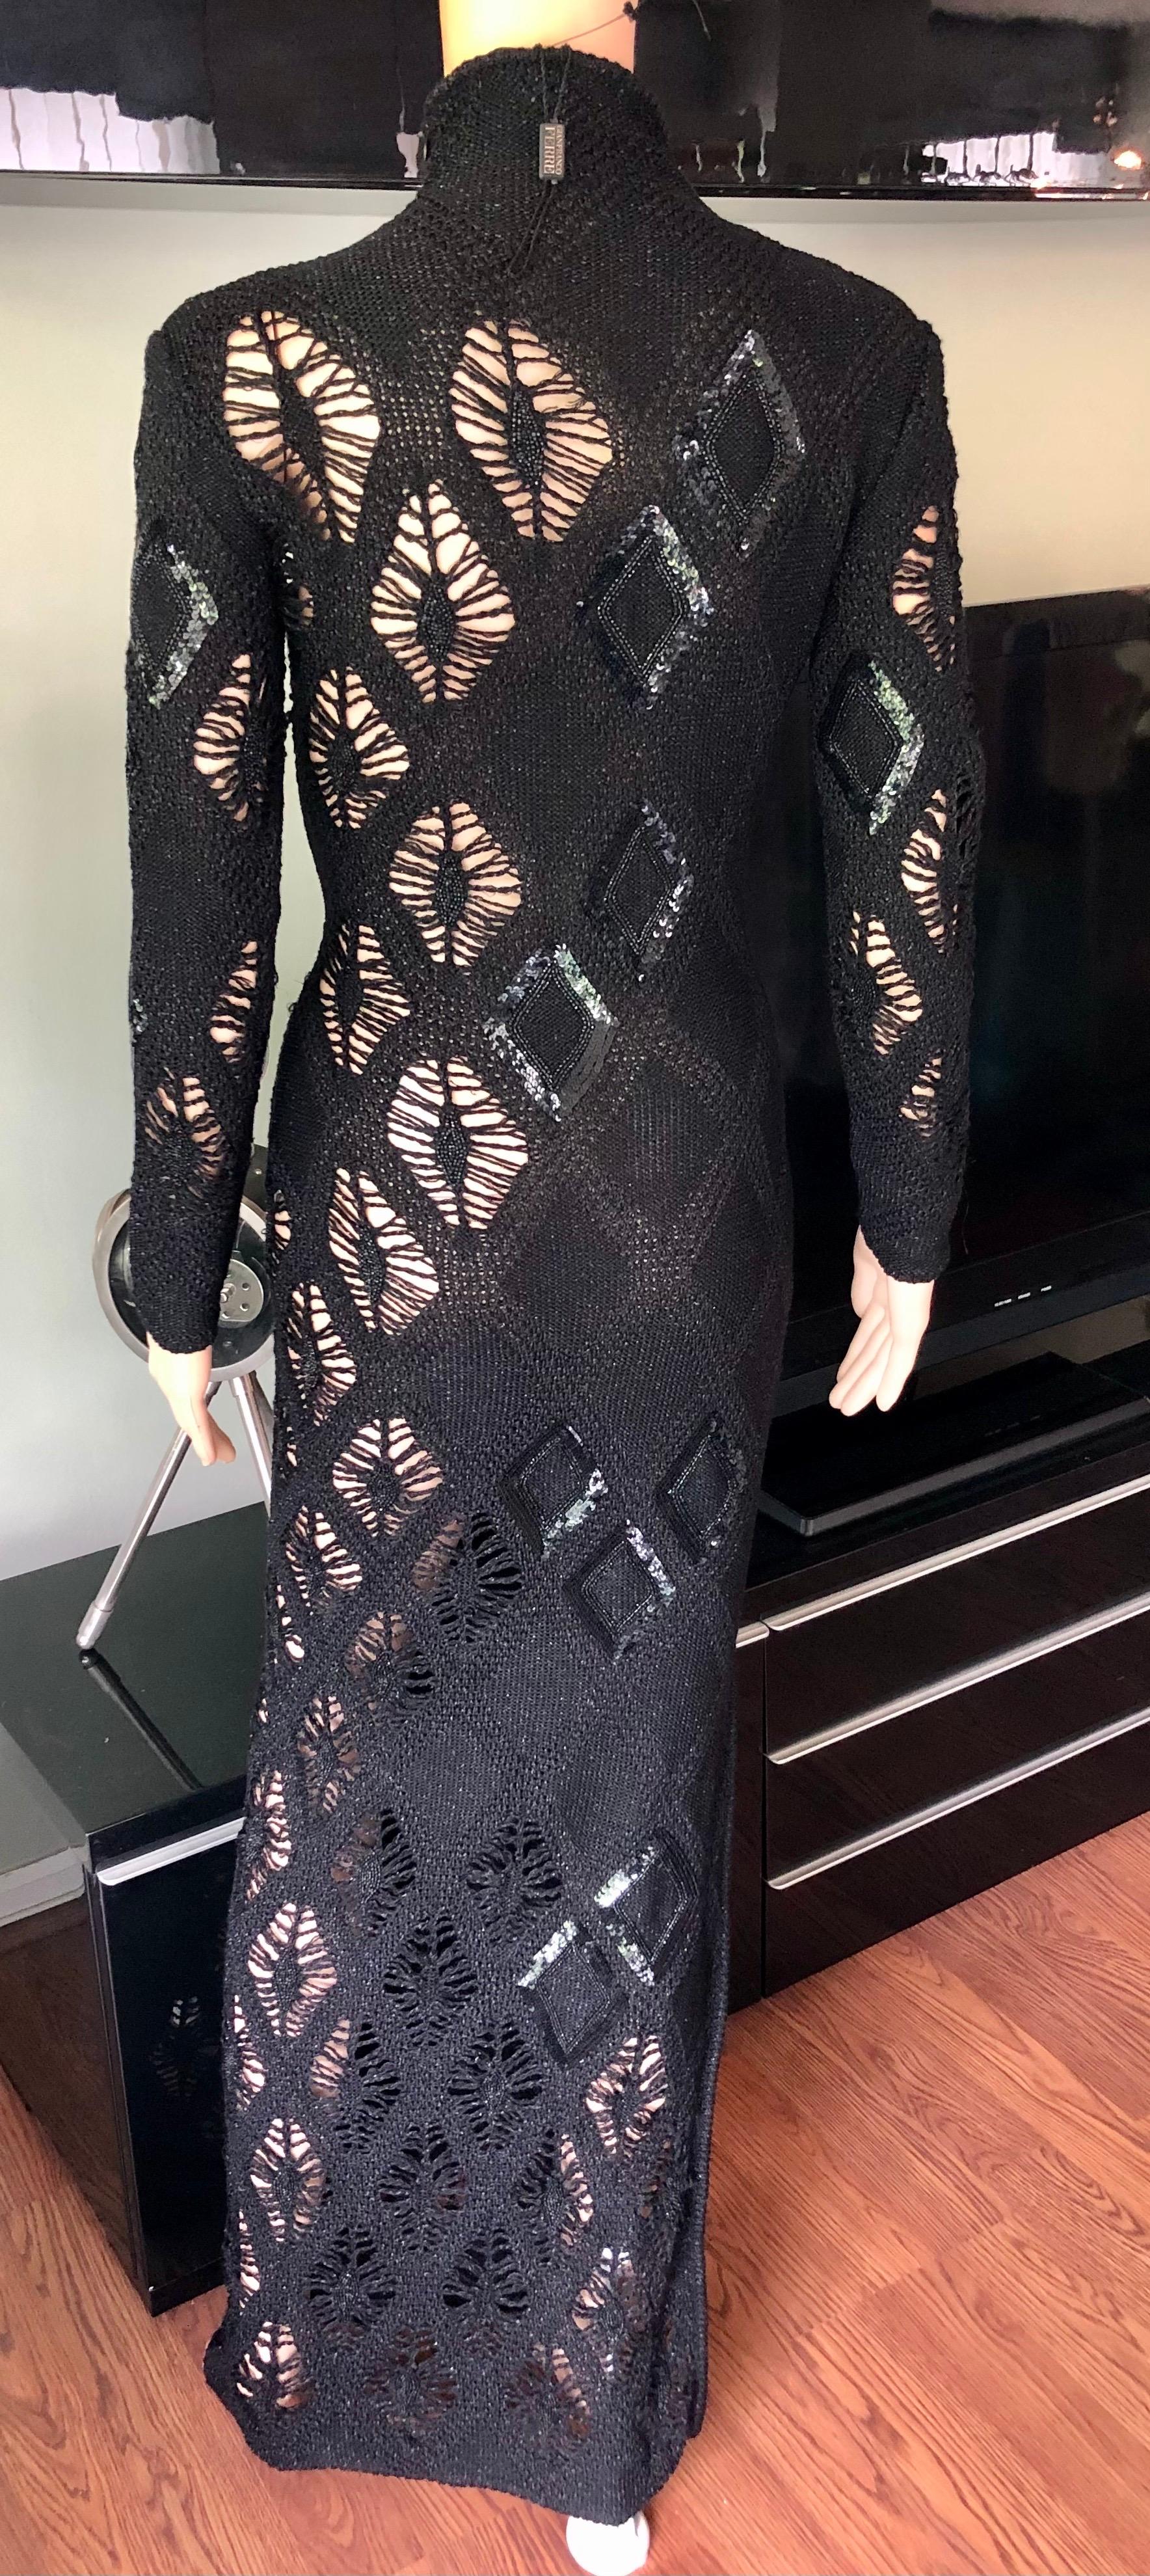 Gianfranco Ferre S/S 2002 Beaded Sequin Sheer Crochet Knit Black Maxi Dress Gown In Excellent Condition For Sale In Naples, FL